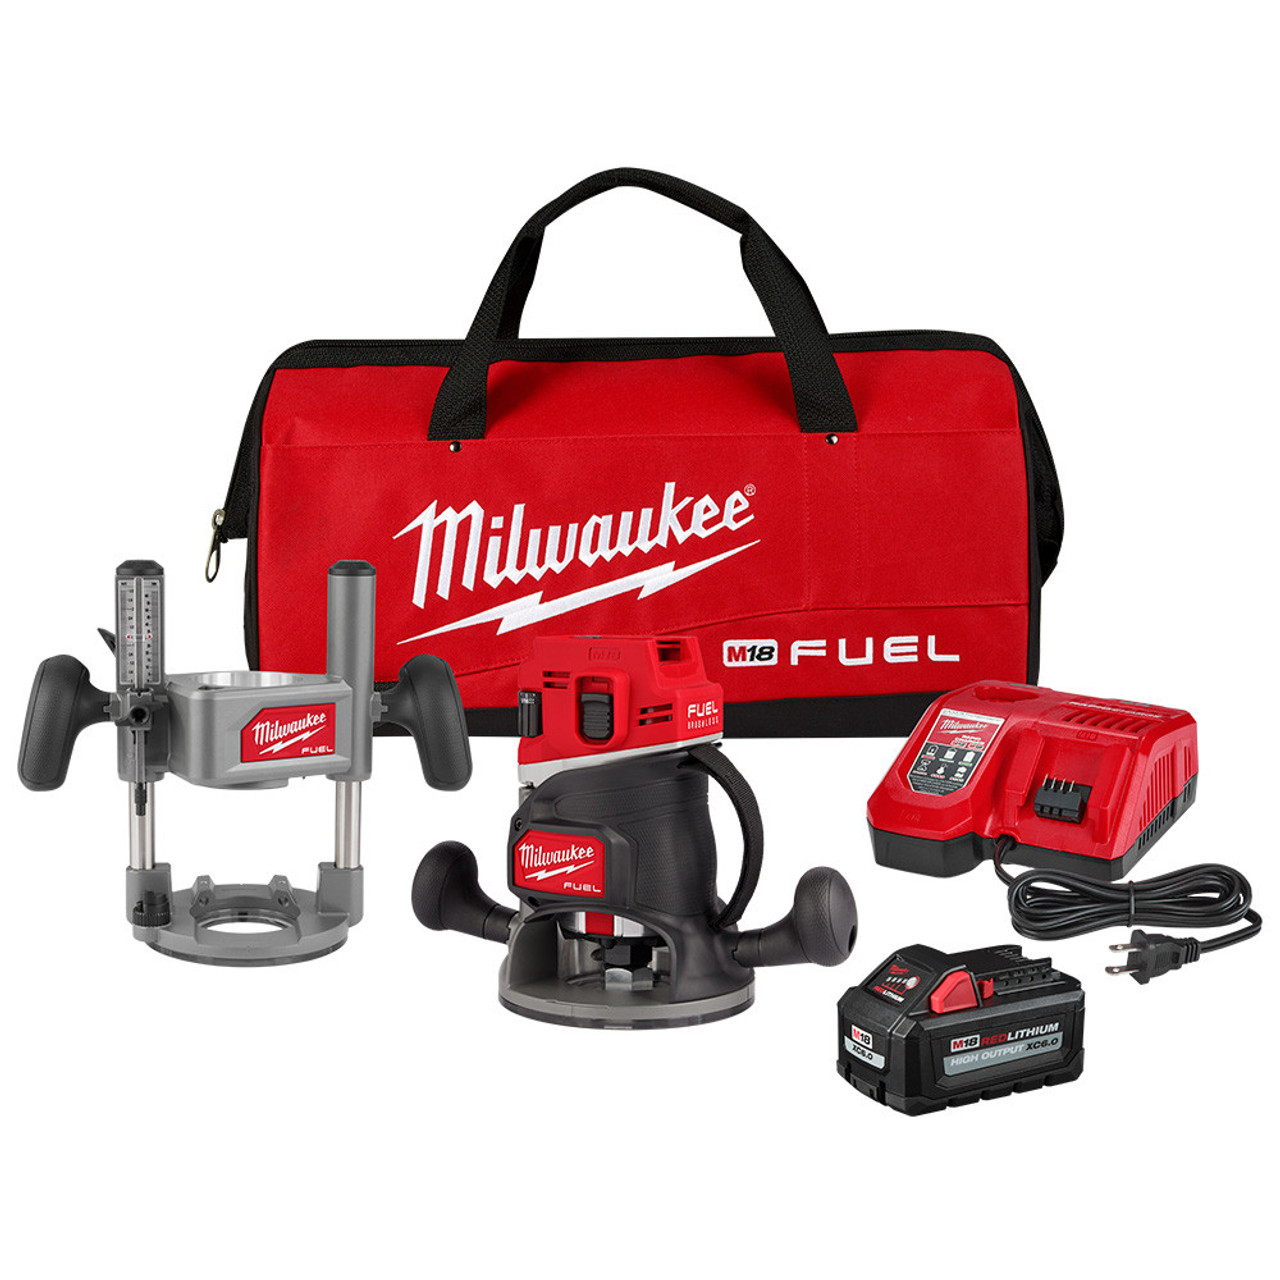 Milwaukee 2838-21 M18 FUEL 1/2 in Router Kit